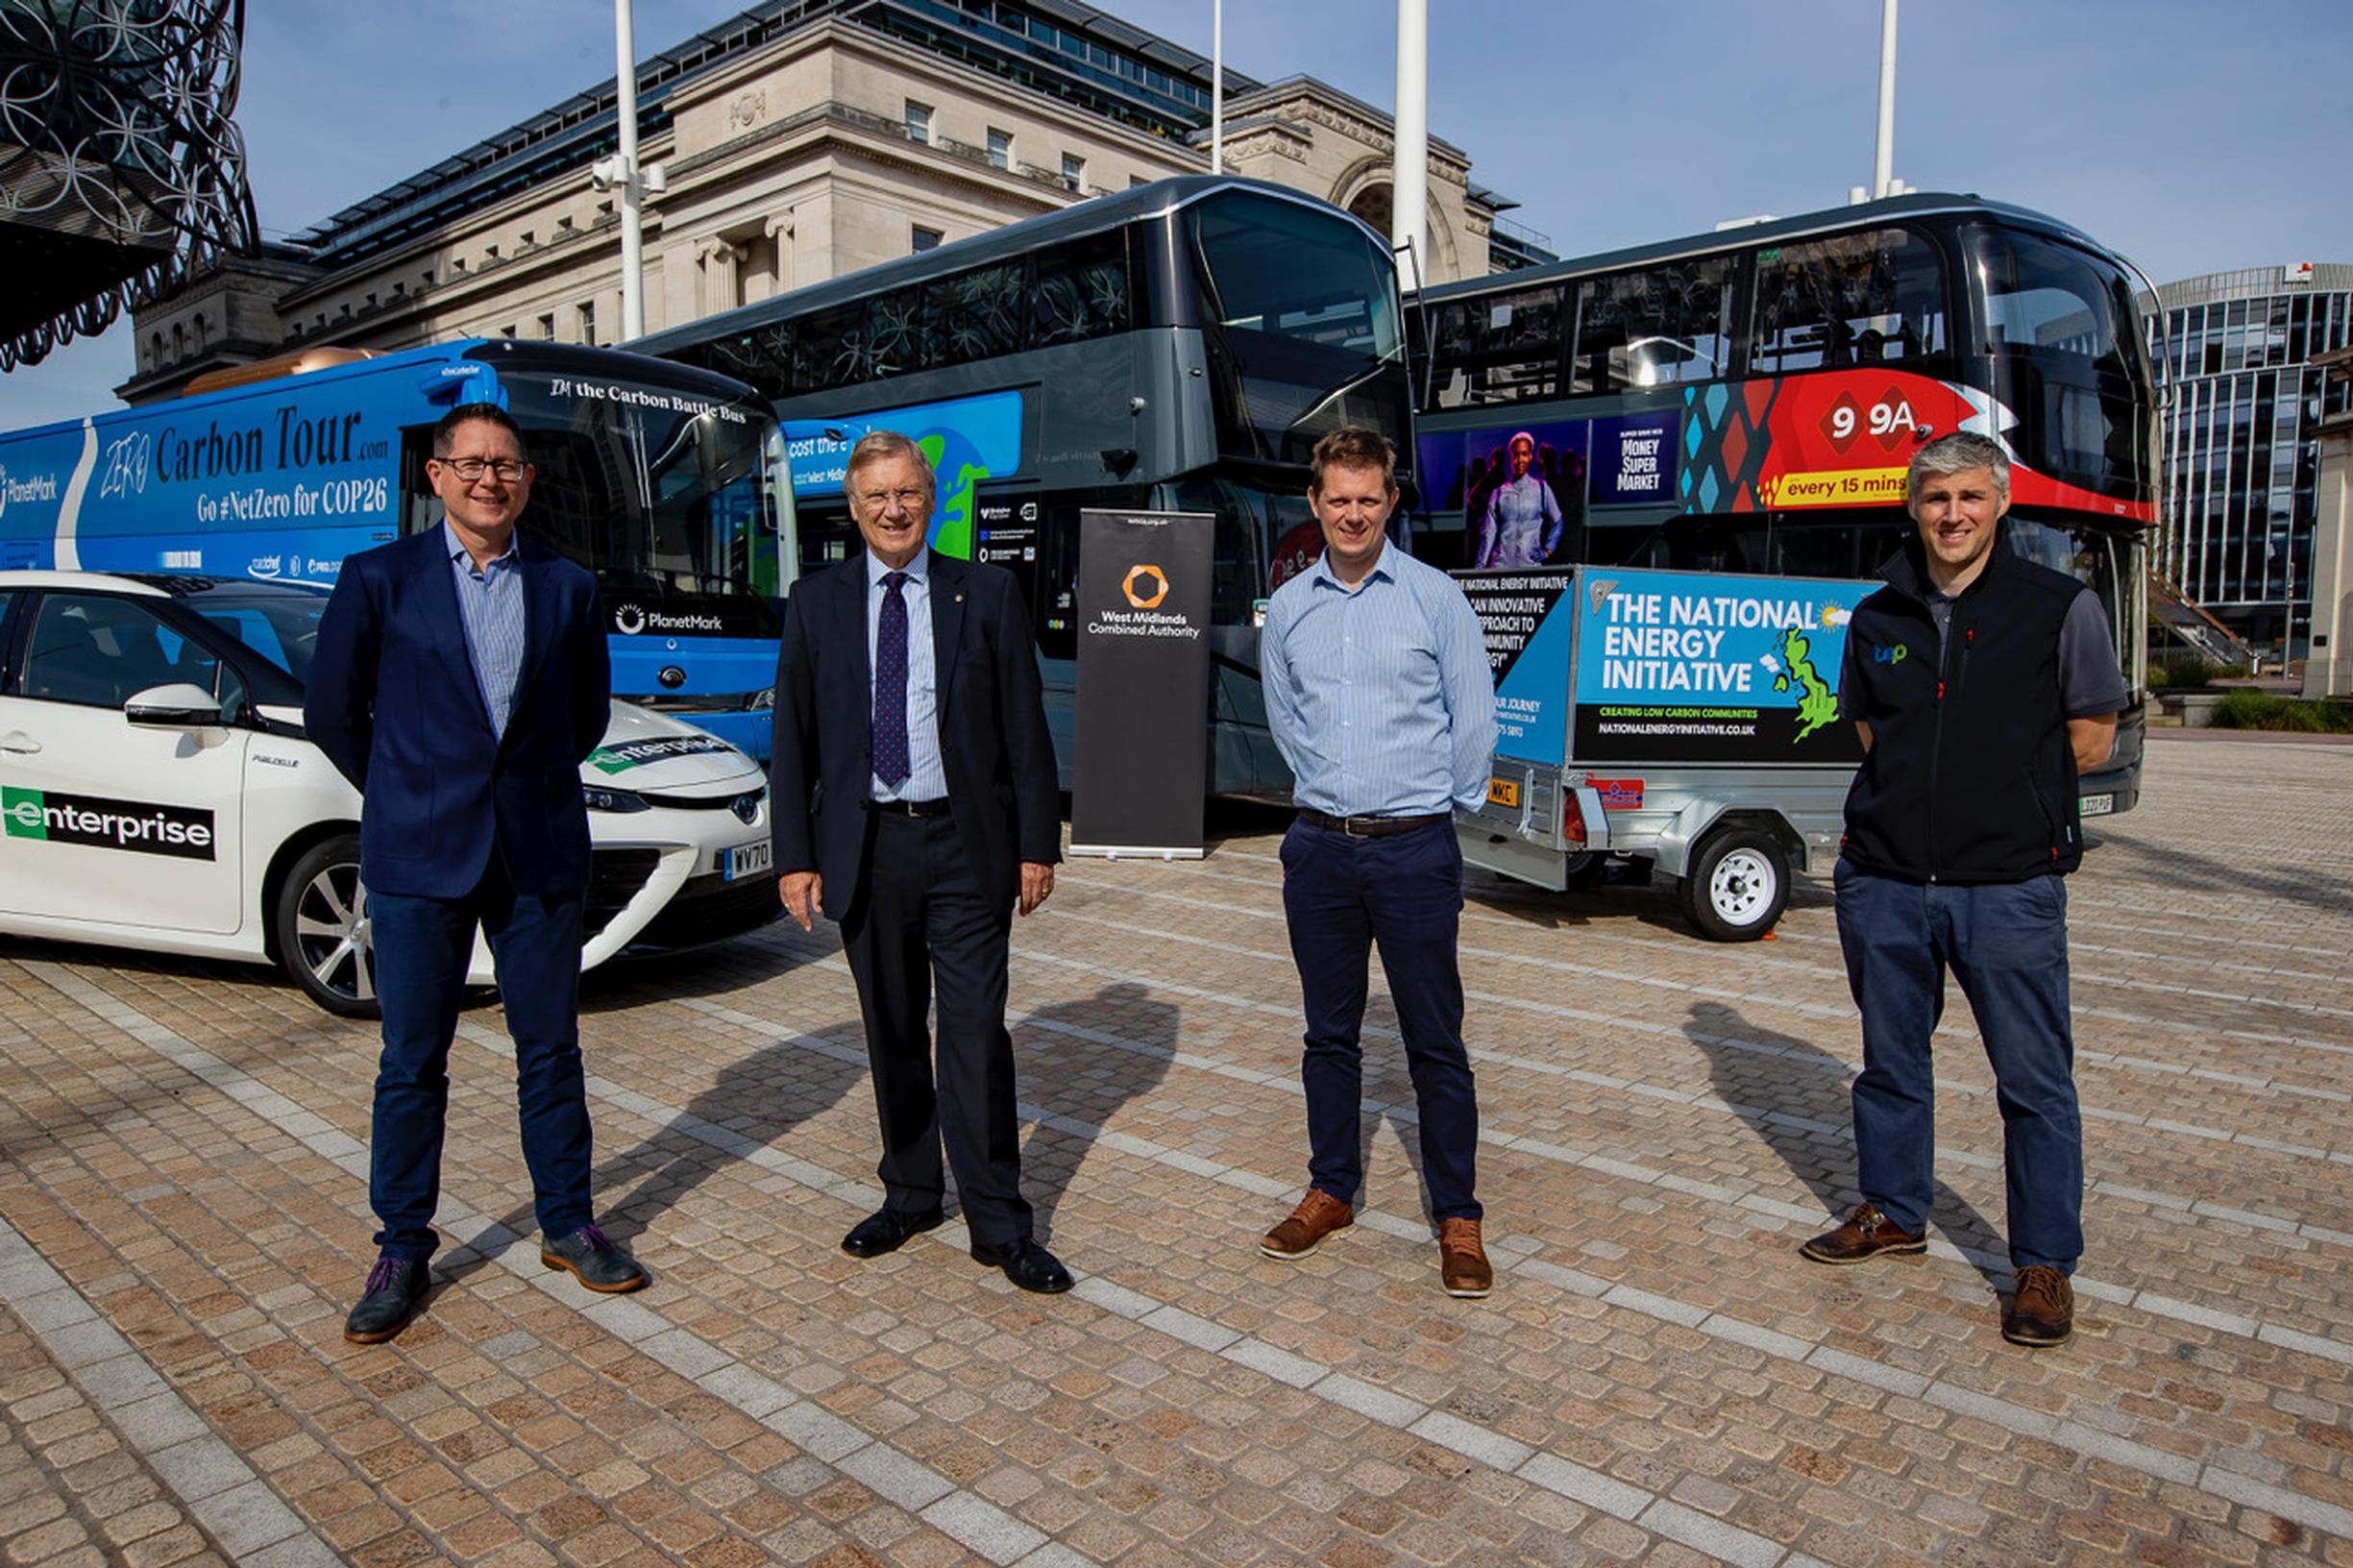 West Midlands’ civic leaders welcome the Zero Carbon Bus on its UK tour in the build-up to COP26 in Glasgow in November